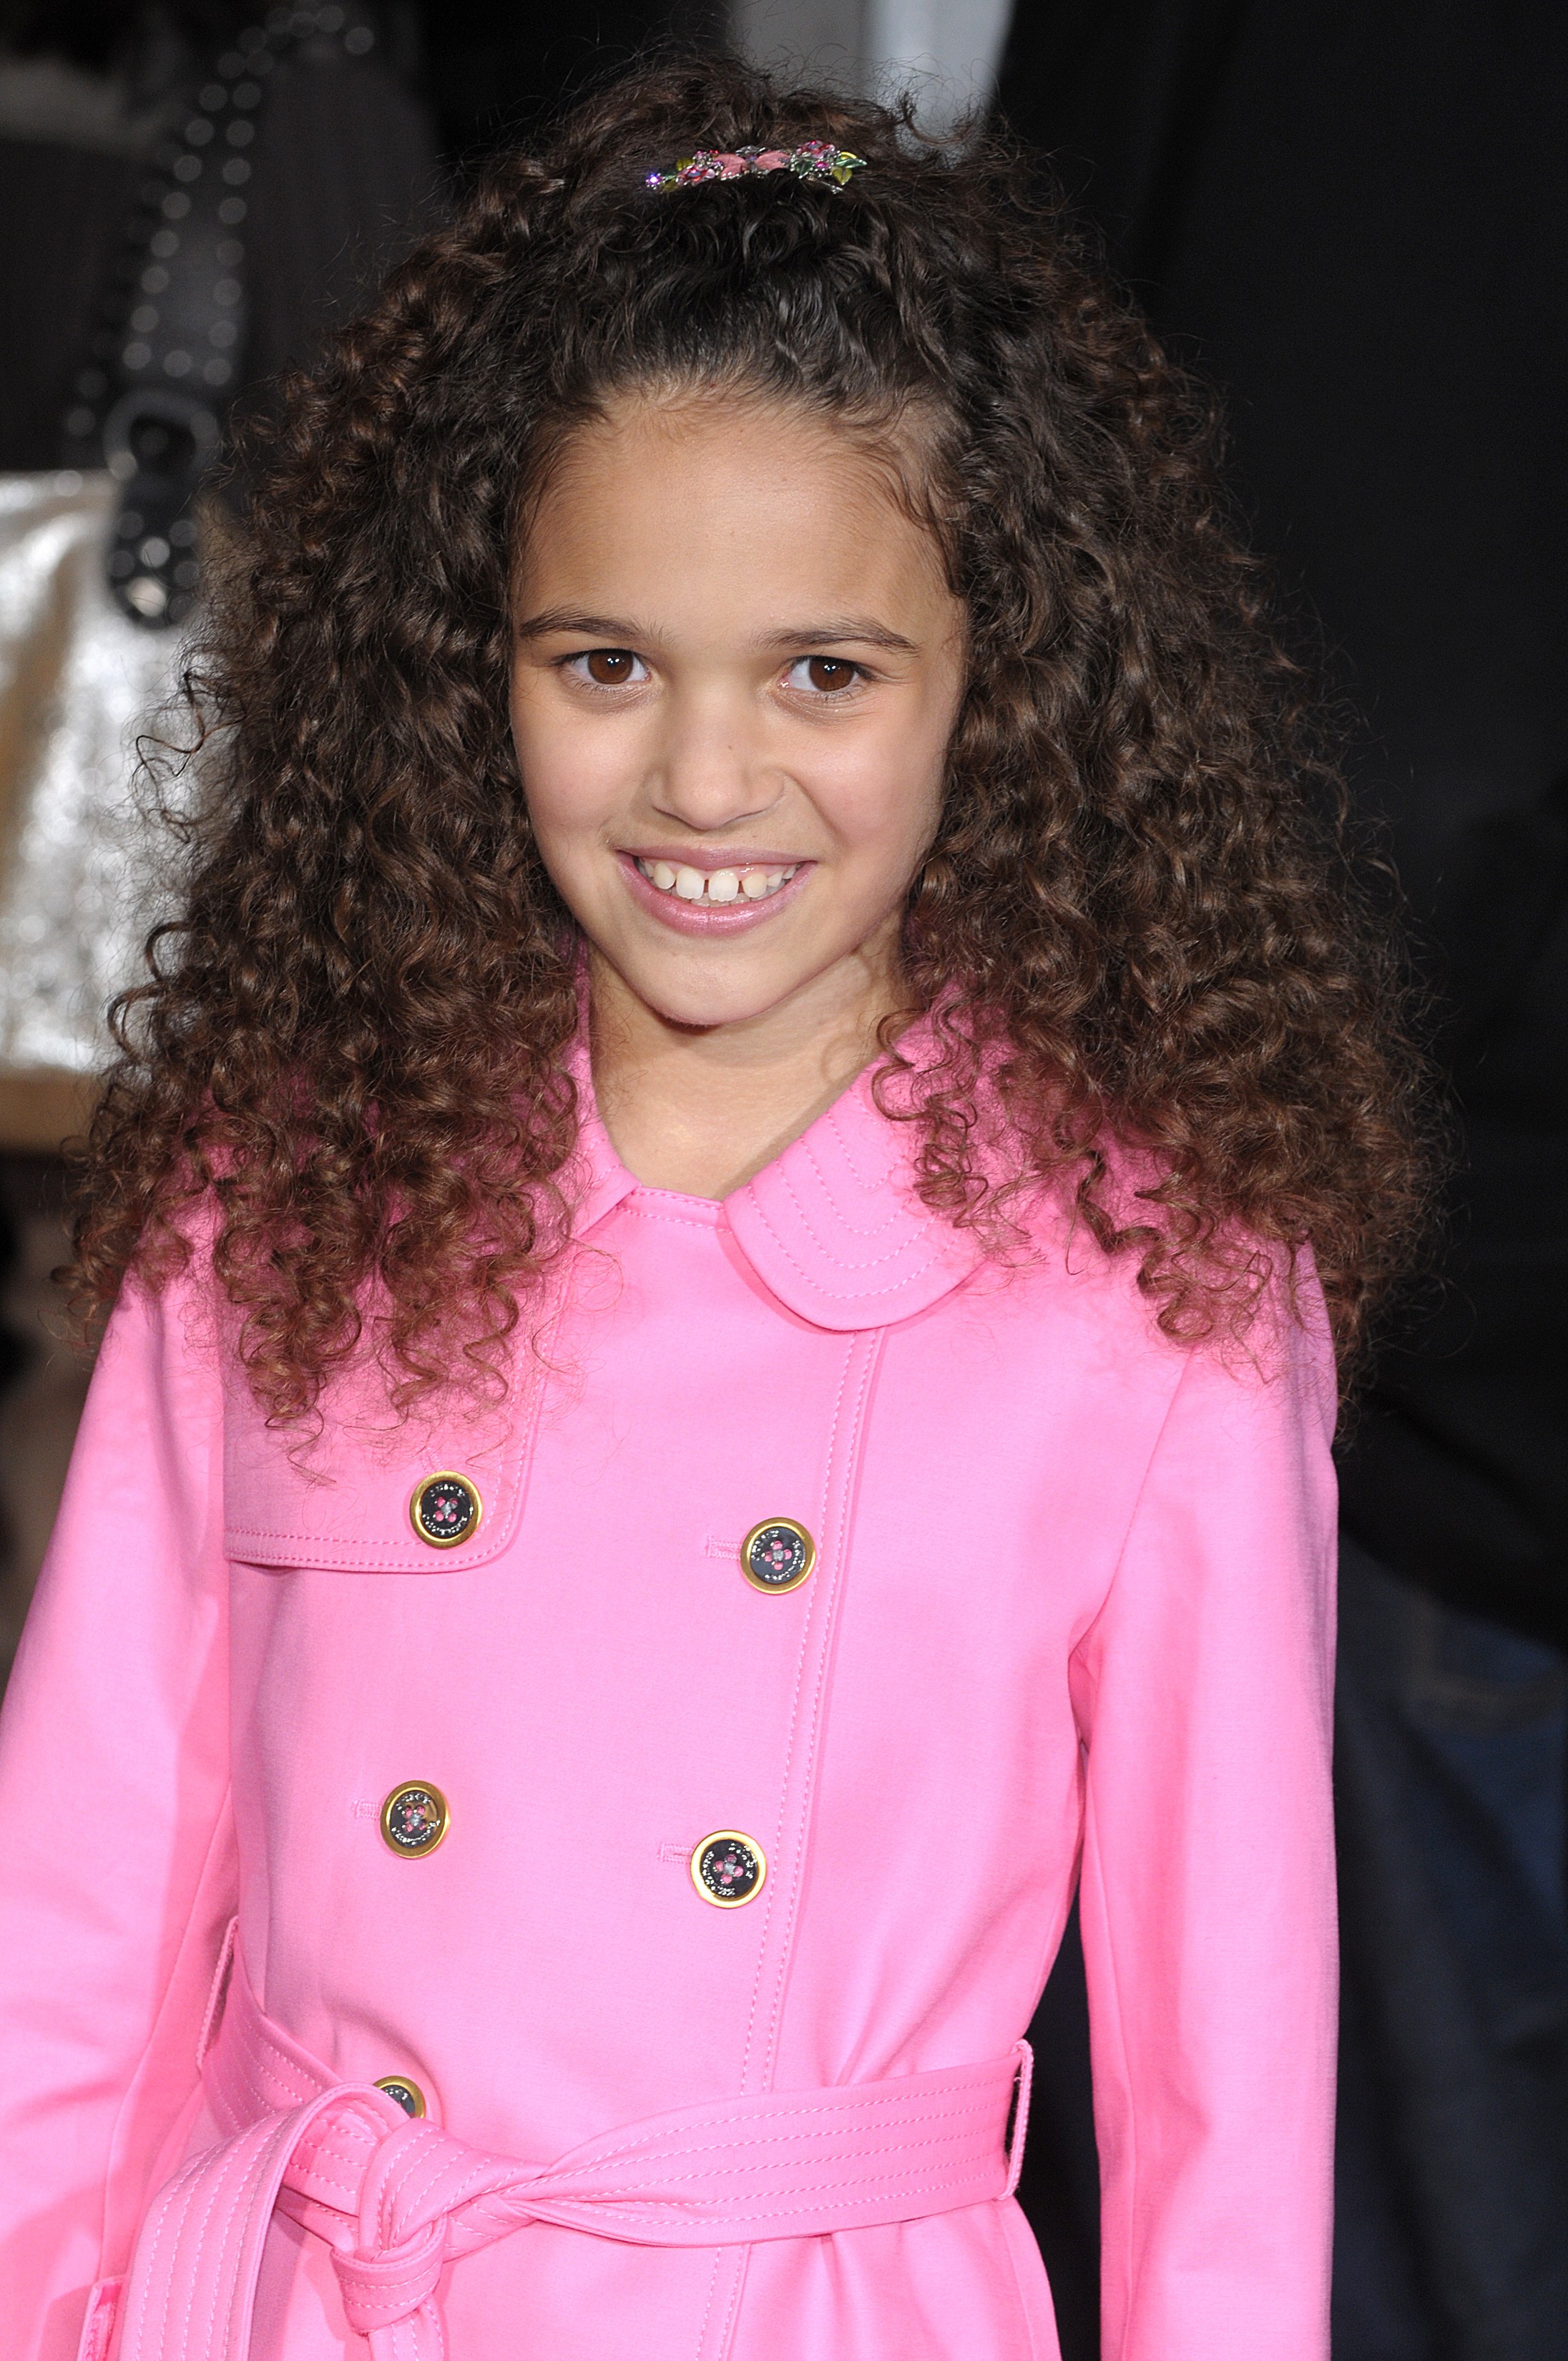 "Actress Madison Pettis arrives to the world premiere of Walt Disney Pictures' "Race To Witch Mountain" at El Capitan Theater in Hollywood. (Photo by Axel Koester/Corbis via Getty Images) (Foto: Corbis via Getty Images)